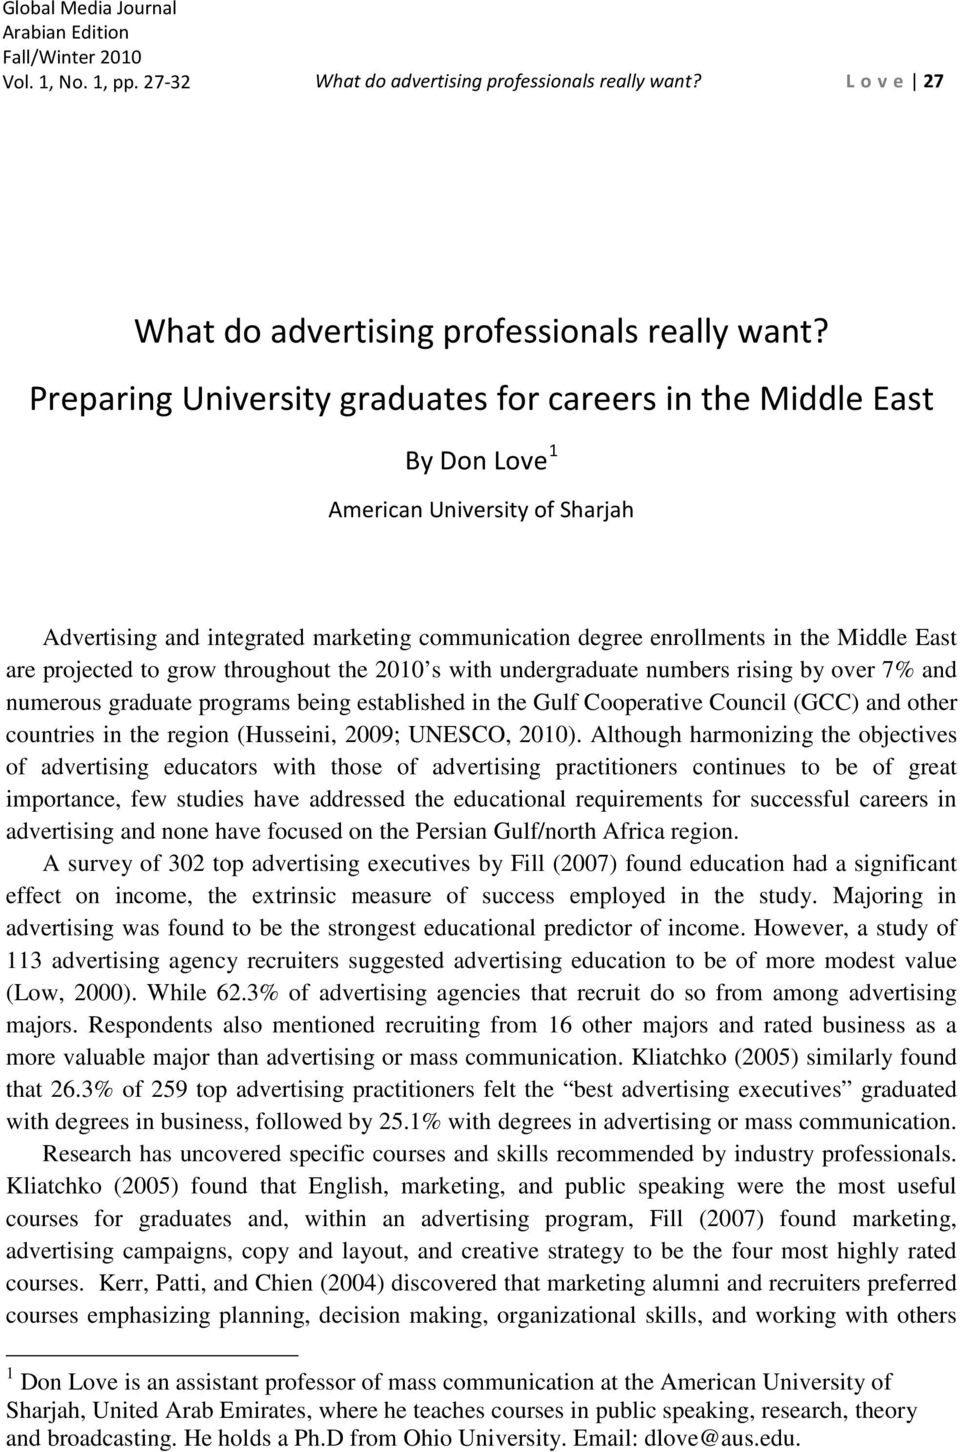 projected to grow throughout the 2010 s with undergraduate numbers rising by over 7% and numerous graduate programs being established in the Gulf Cooperative Council (GCC) and other countries in the